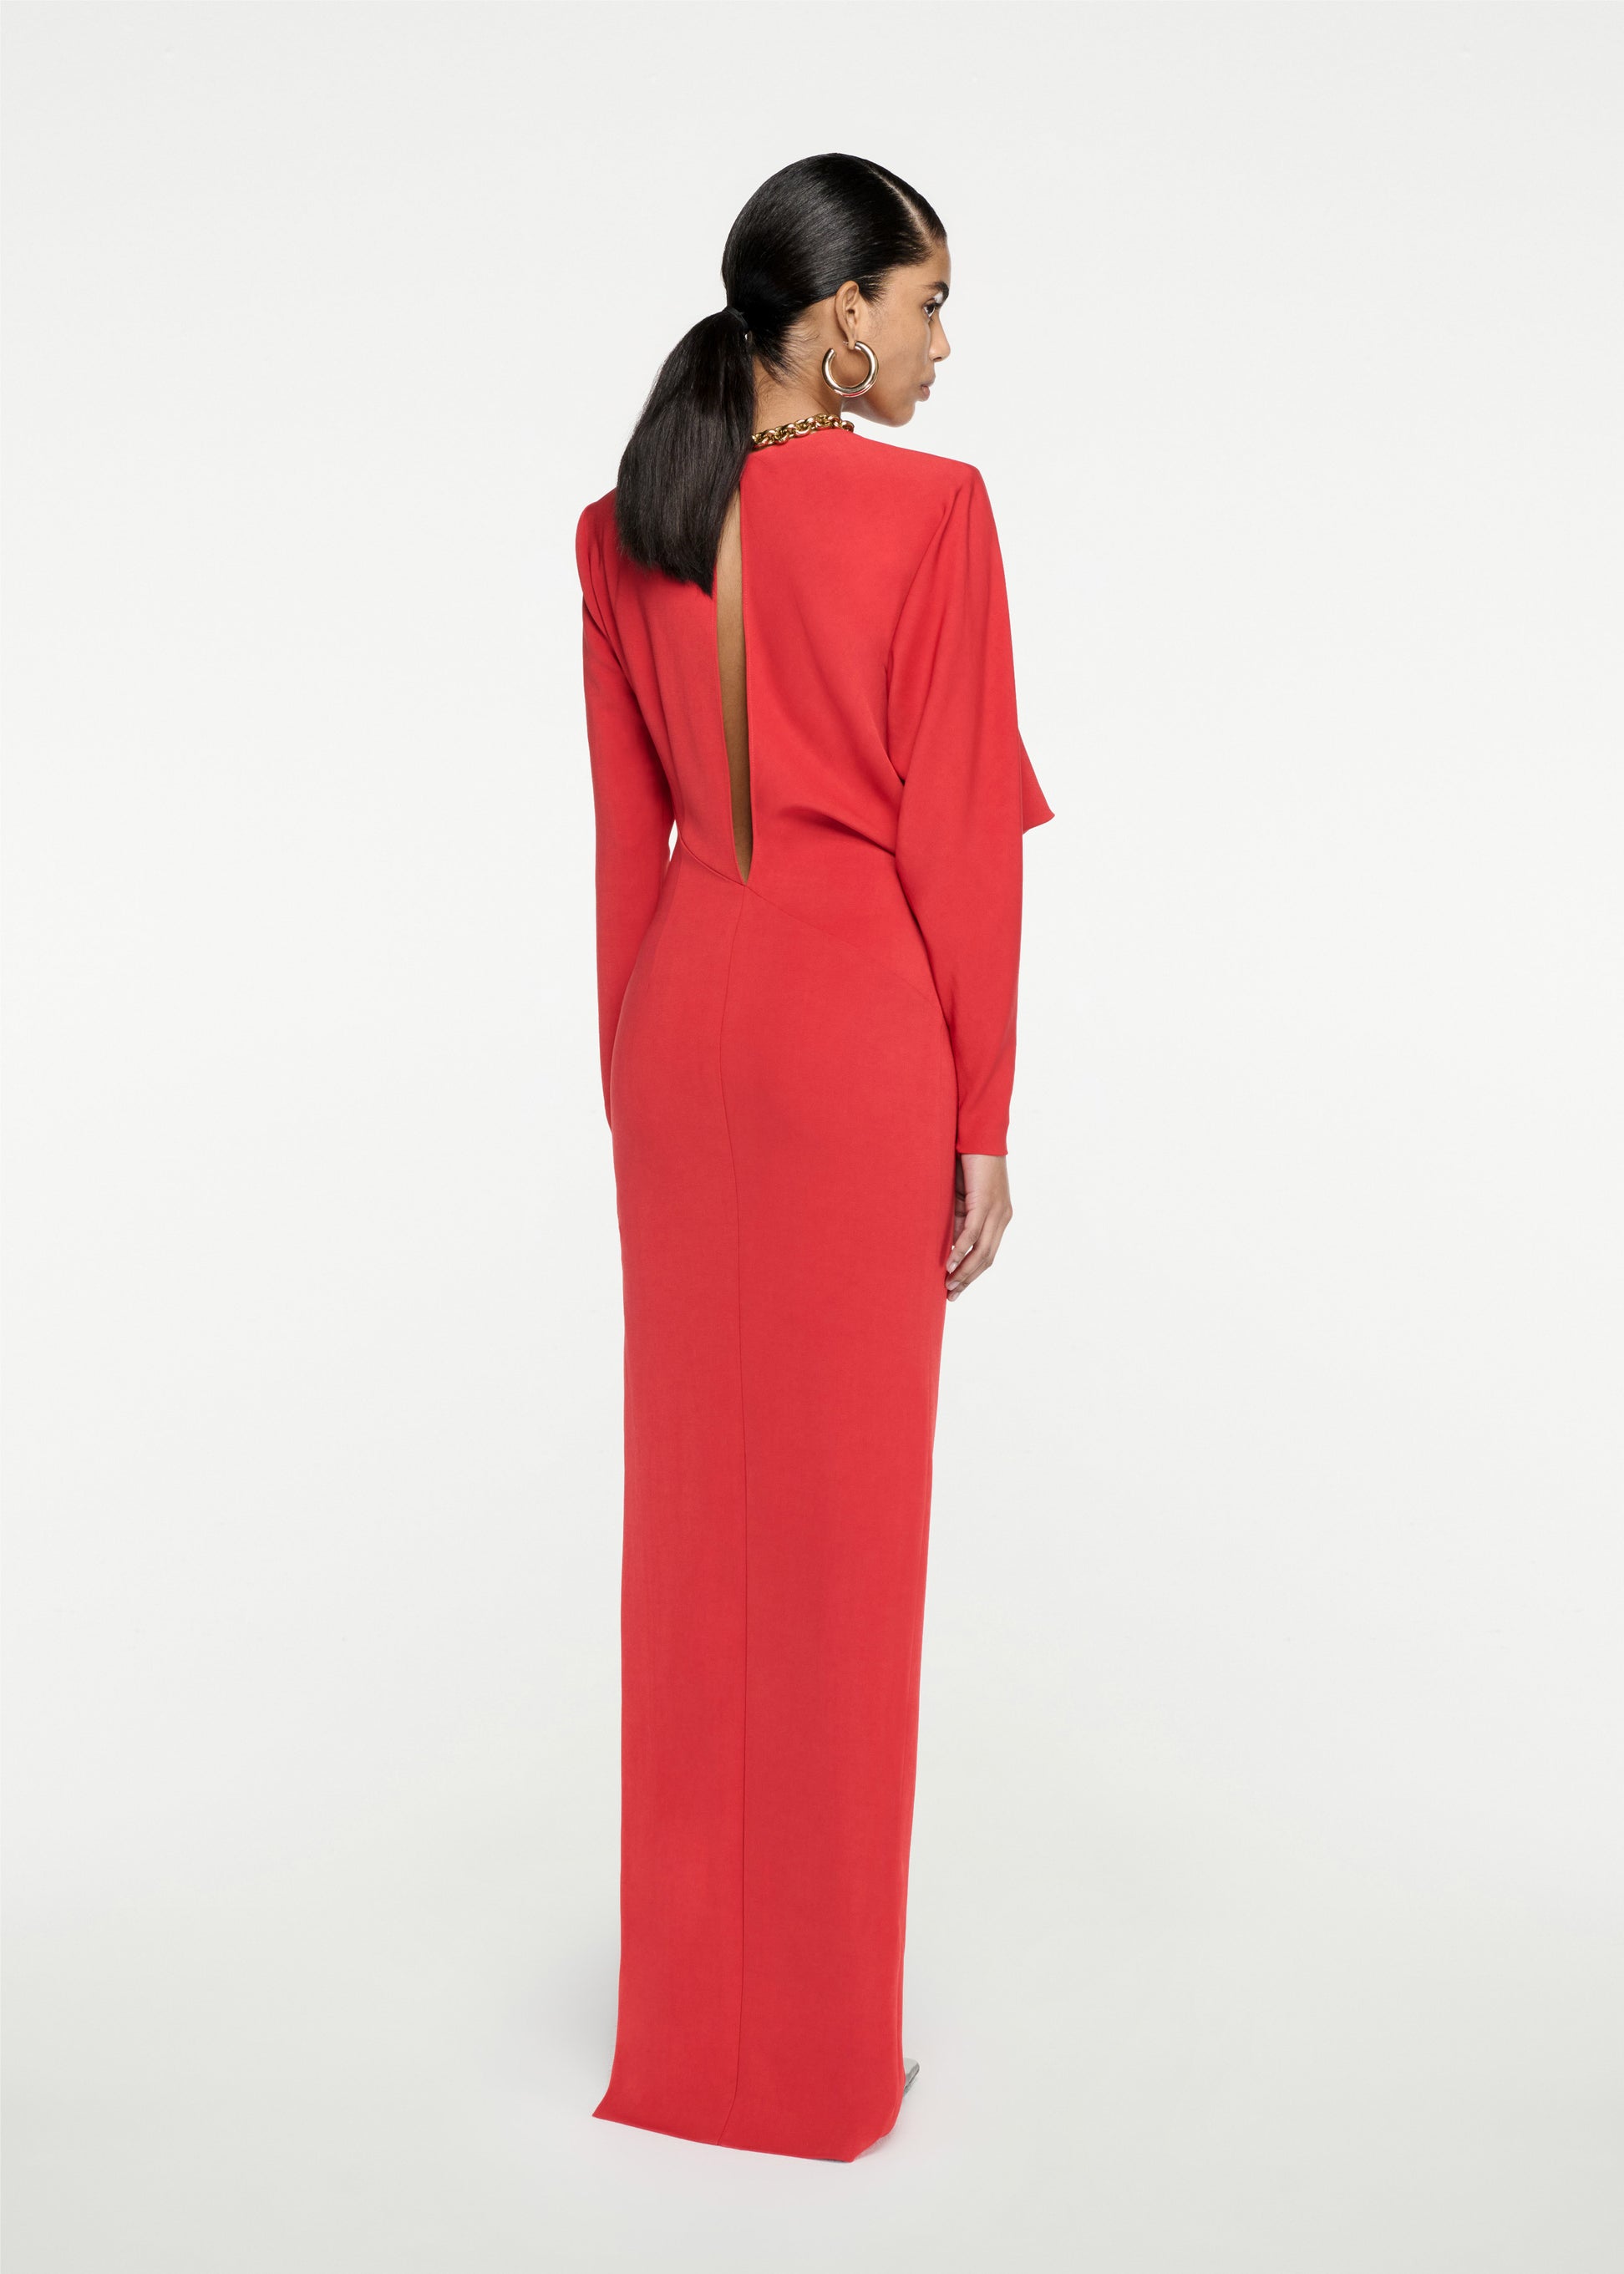 The back of a woman wearing the Long Sleeve Stretch Cady Maxi Dress in Red